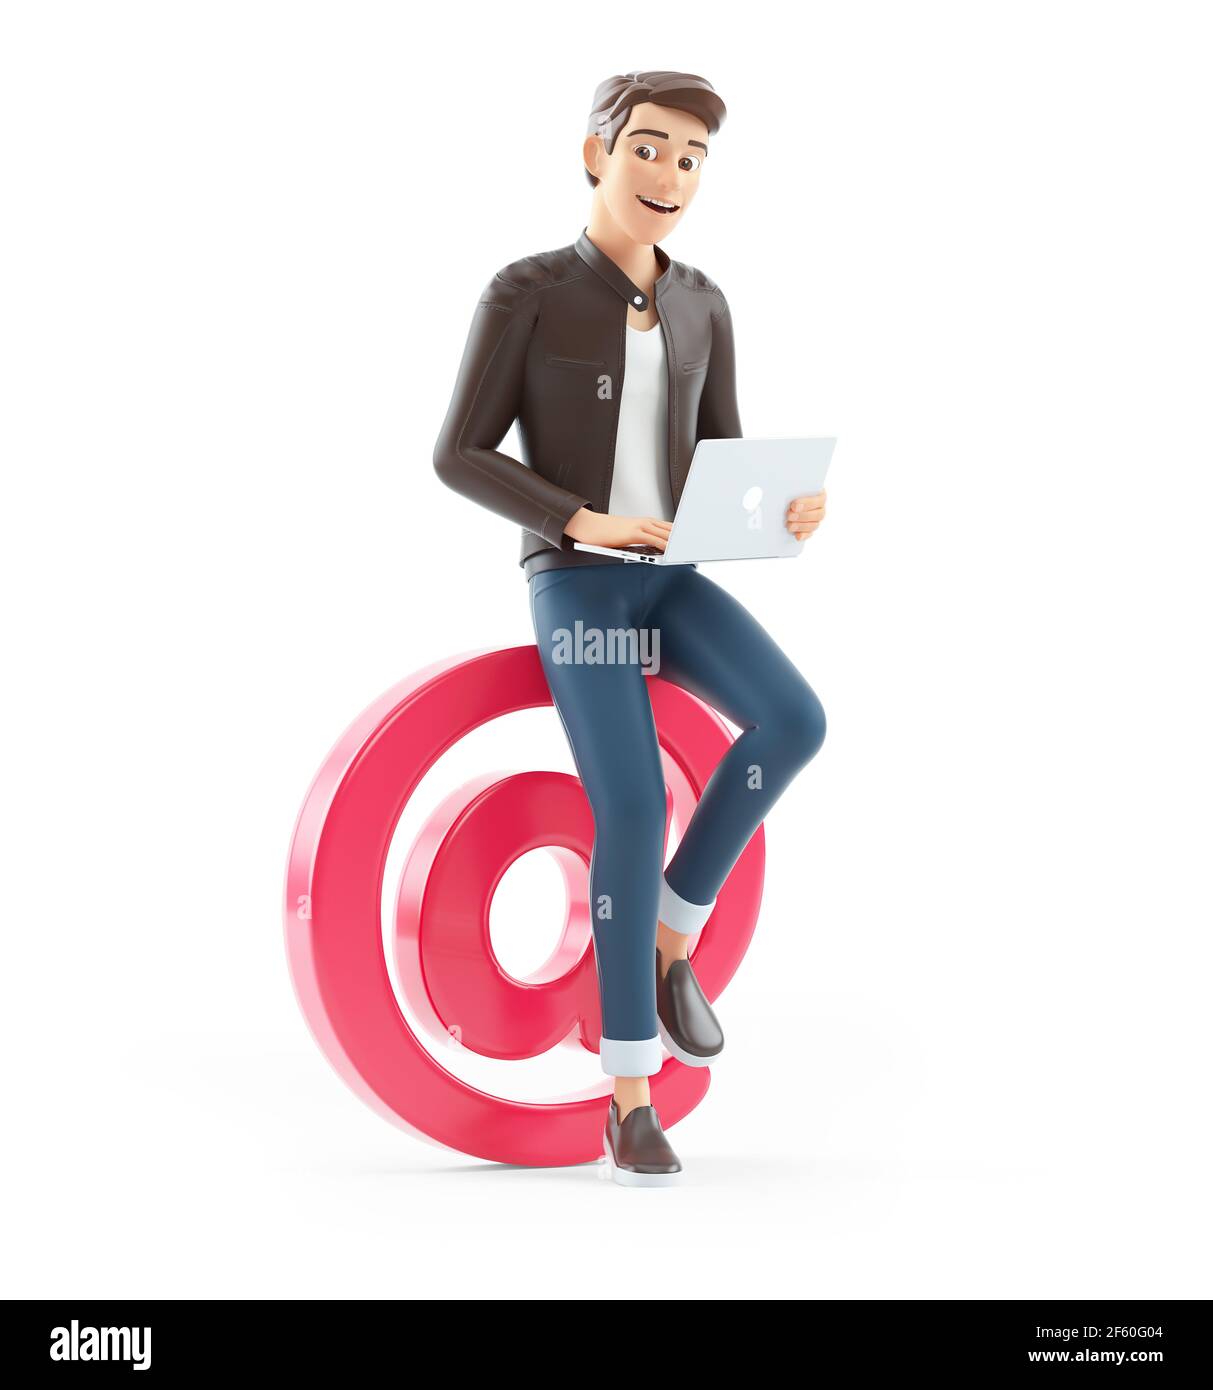 3d cartoon man working on at sign, illustration isolated on white background Stock Photo